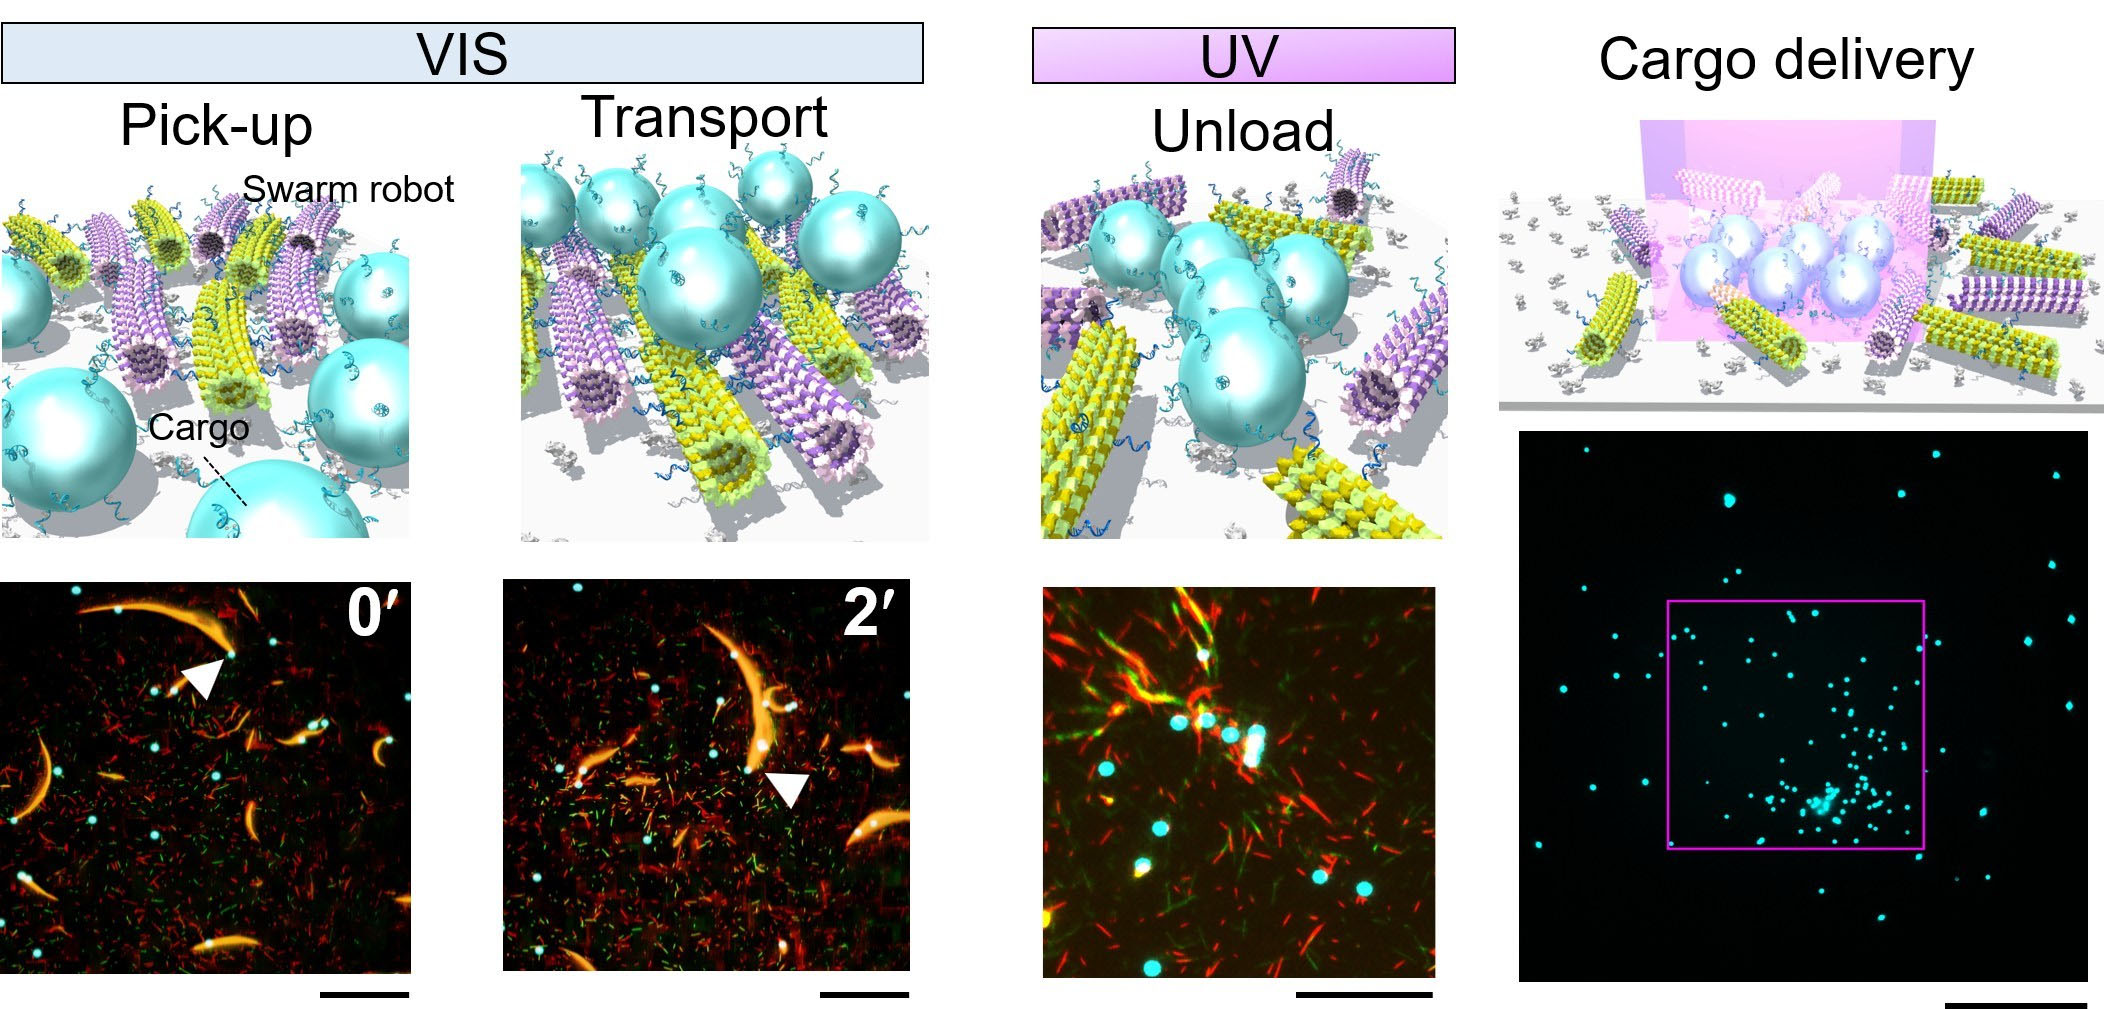 Schematic illustrations of cargo transport by a swarm of molecular robots